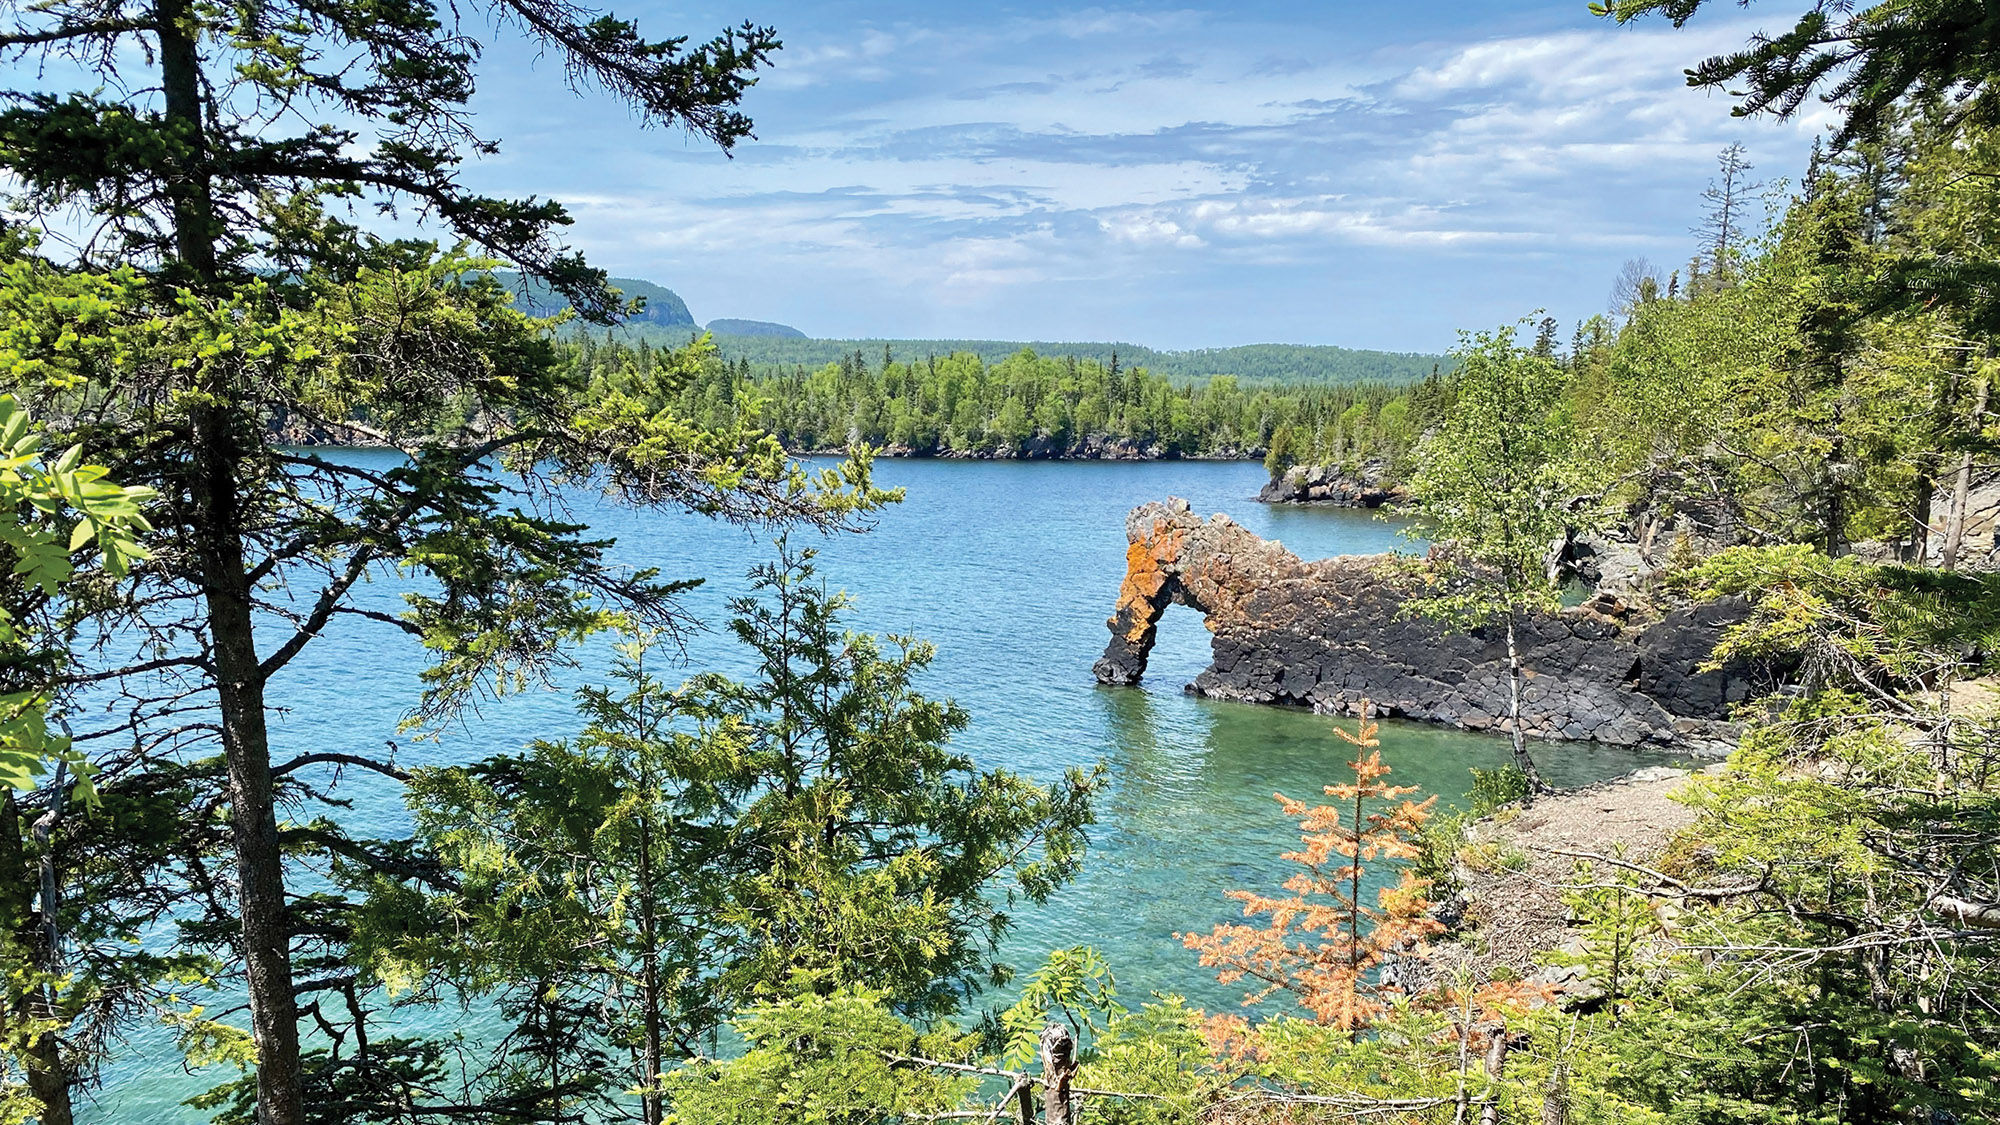 Sea Lion Rock juts into Lake Superior at Perry Bay just northwest of Silver Islet.